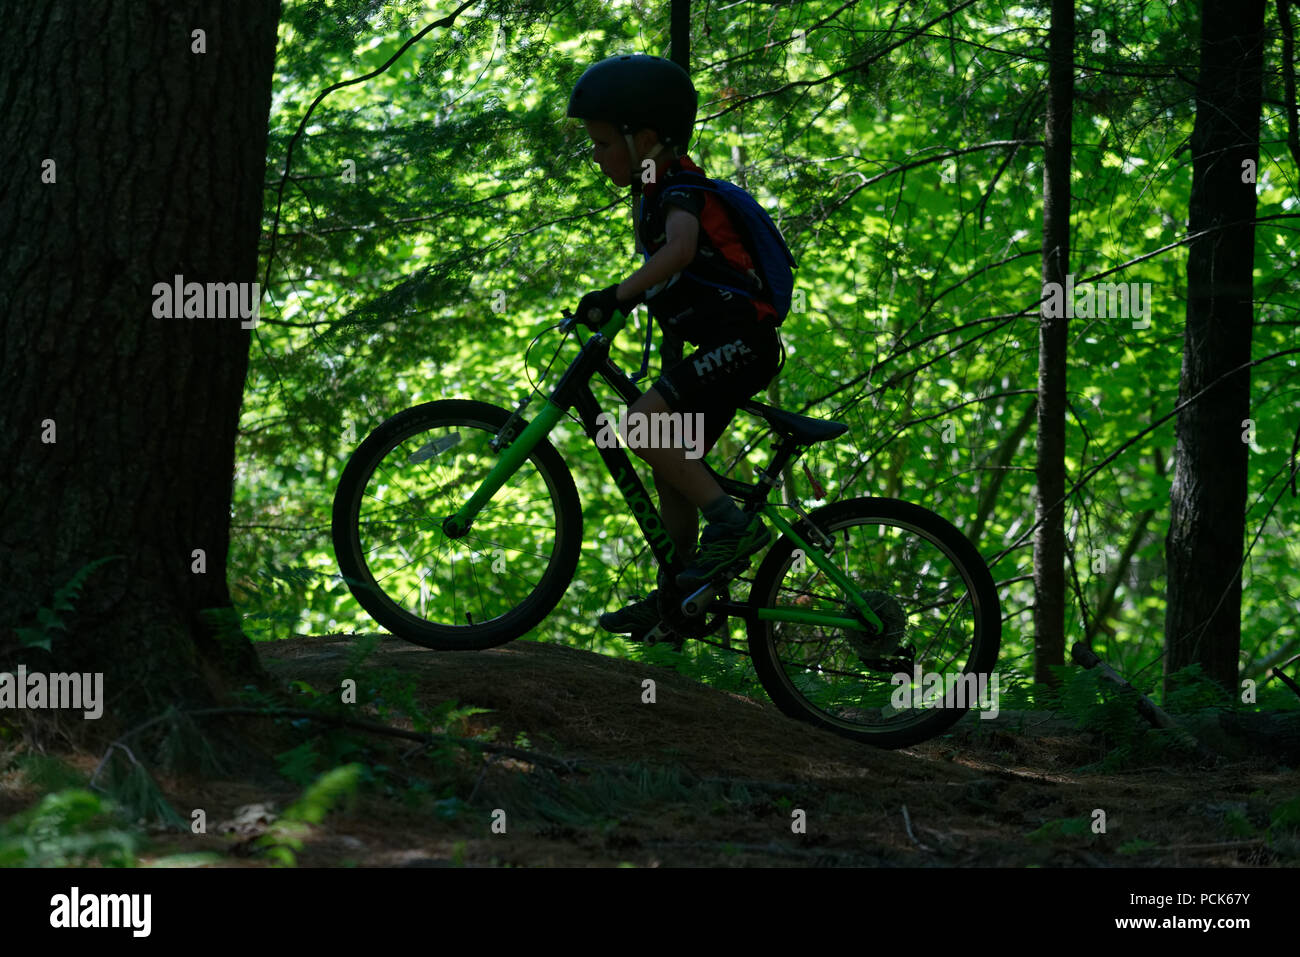 A young boy (6 yrs old) on a mountain bike silhouetted against bright sunlit foliage in East Burke's Kingdom Trails, Vermont, USA Stock Photo